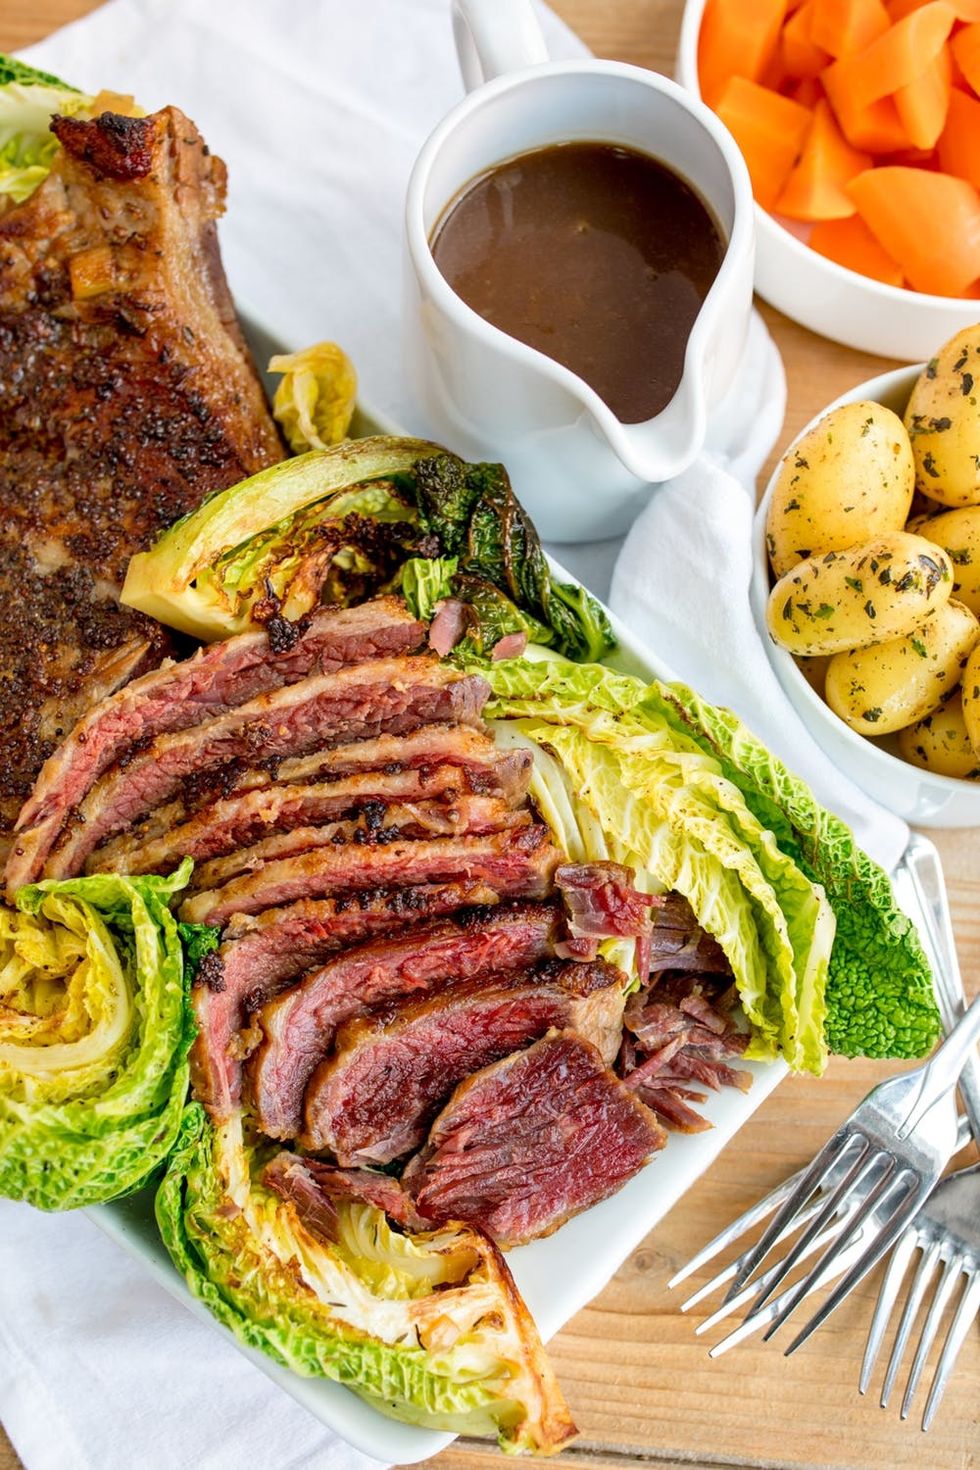 Making This Corned Beef With Cabbage Recipe FROM SCRATCH Will Impress Everyone!